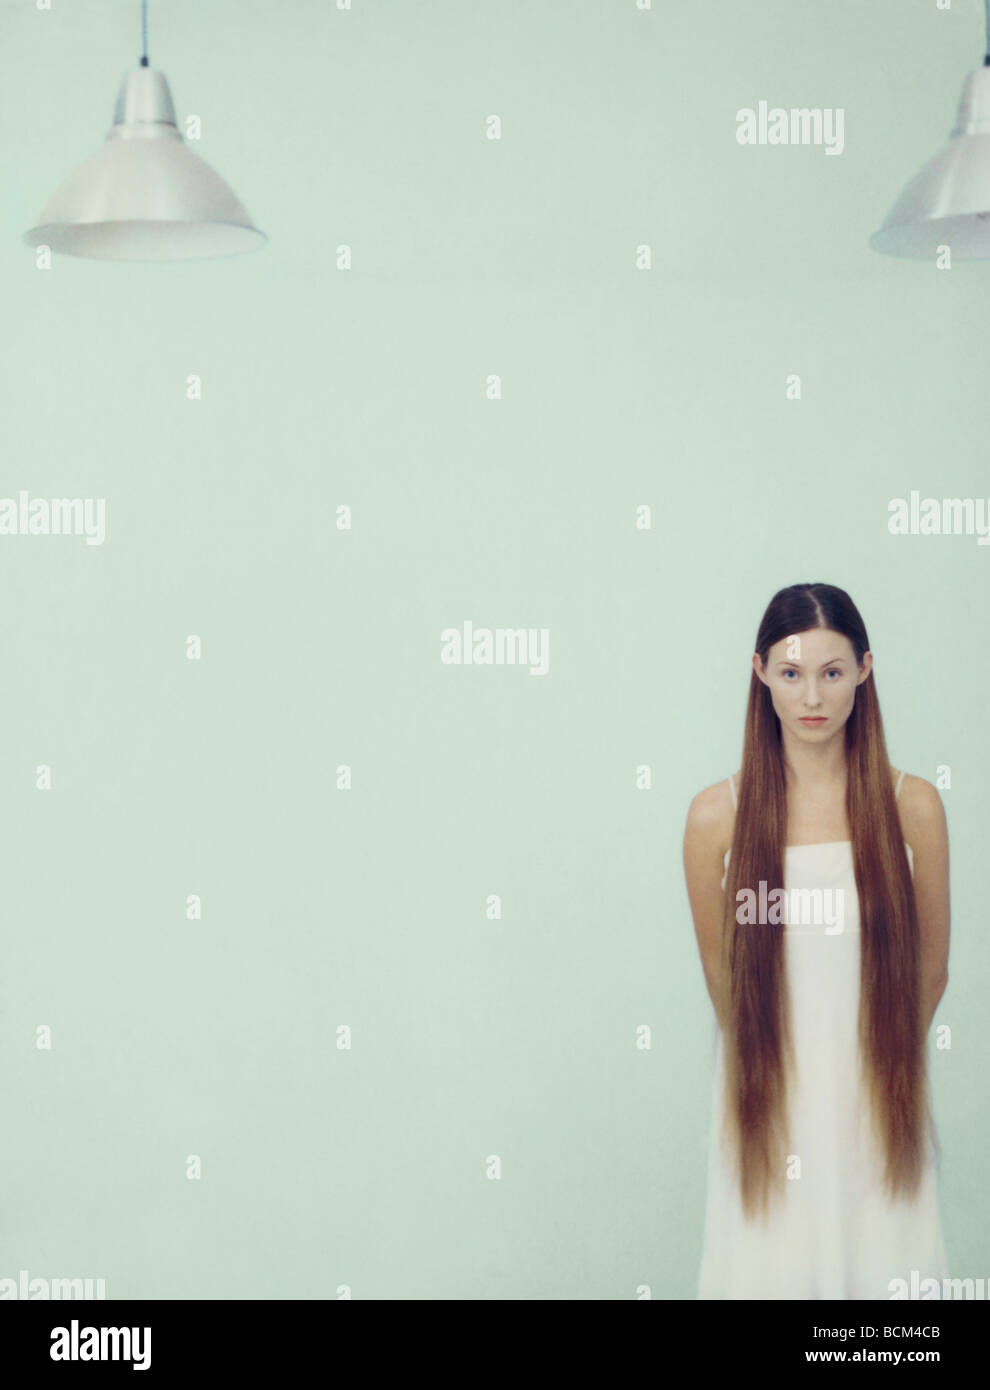 Young woman with long hair standing, looking at camera Stock Photo